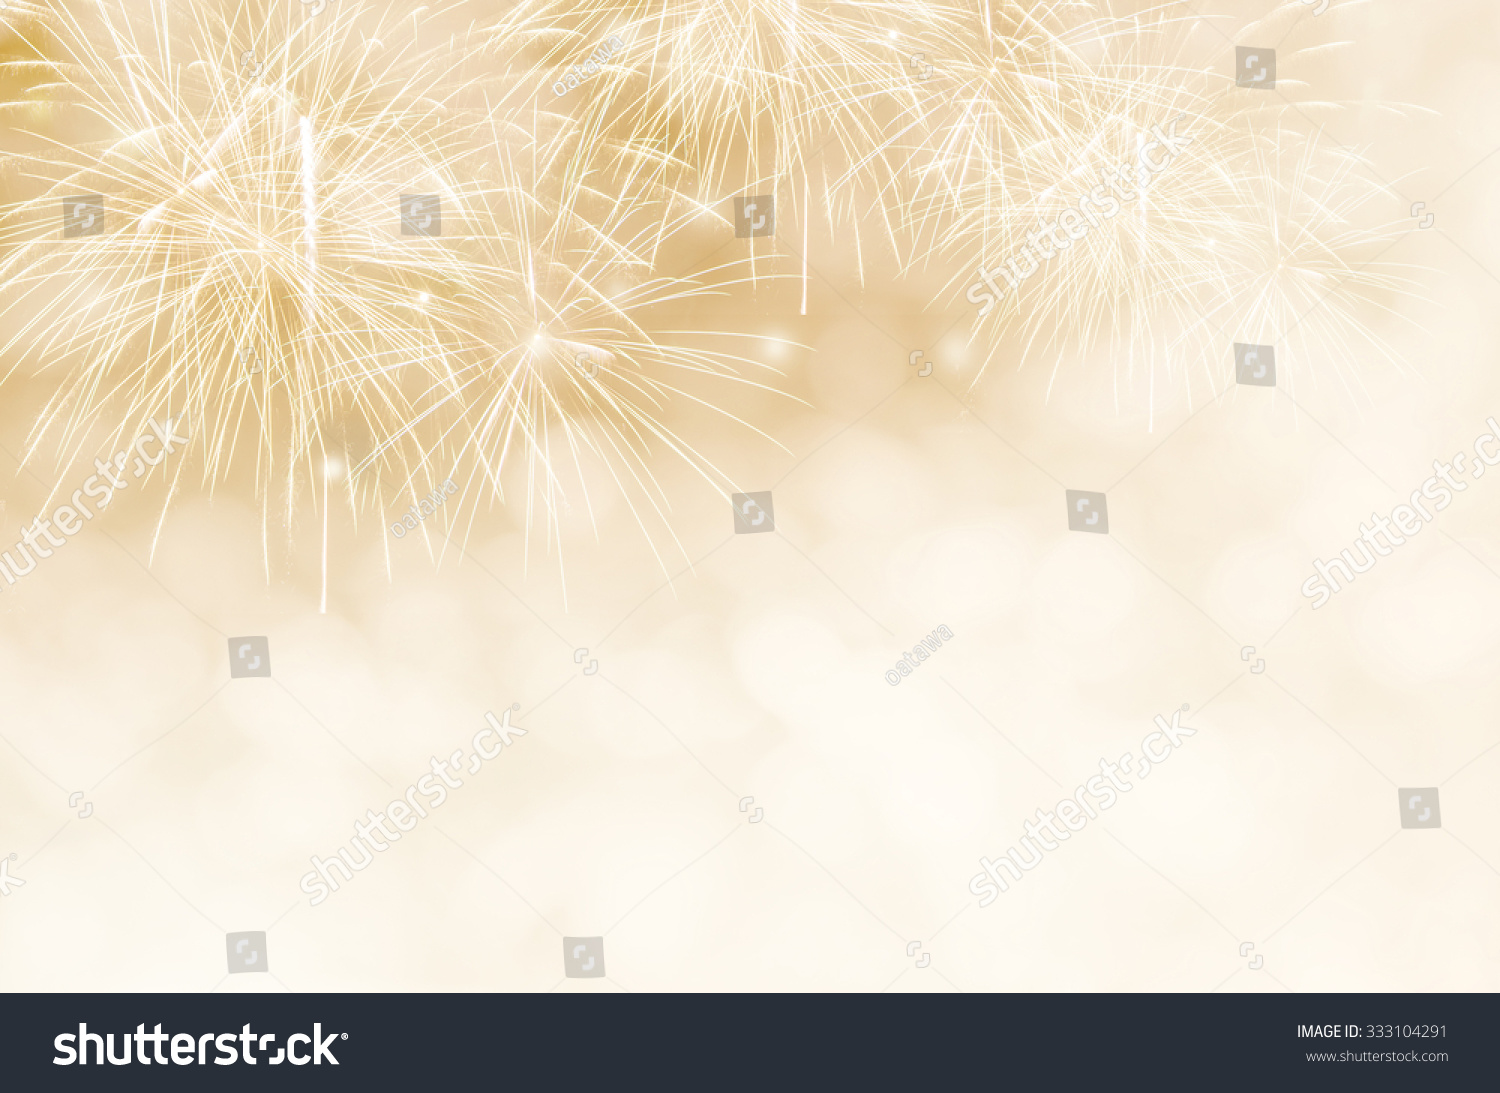 Fireworks at New Year and copy space. #333104291